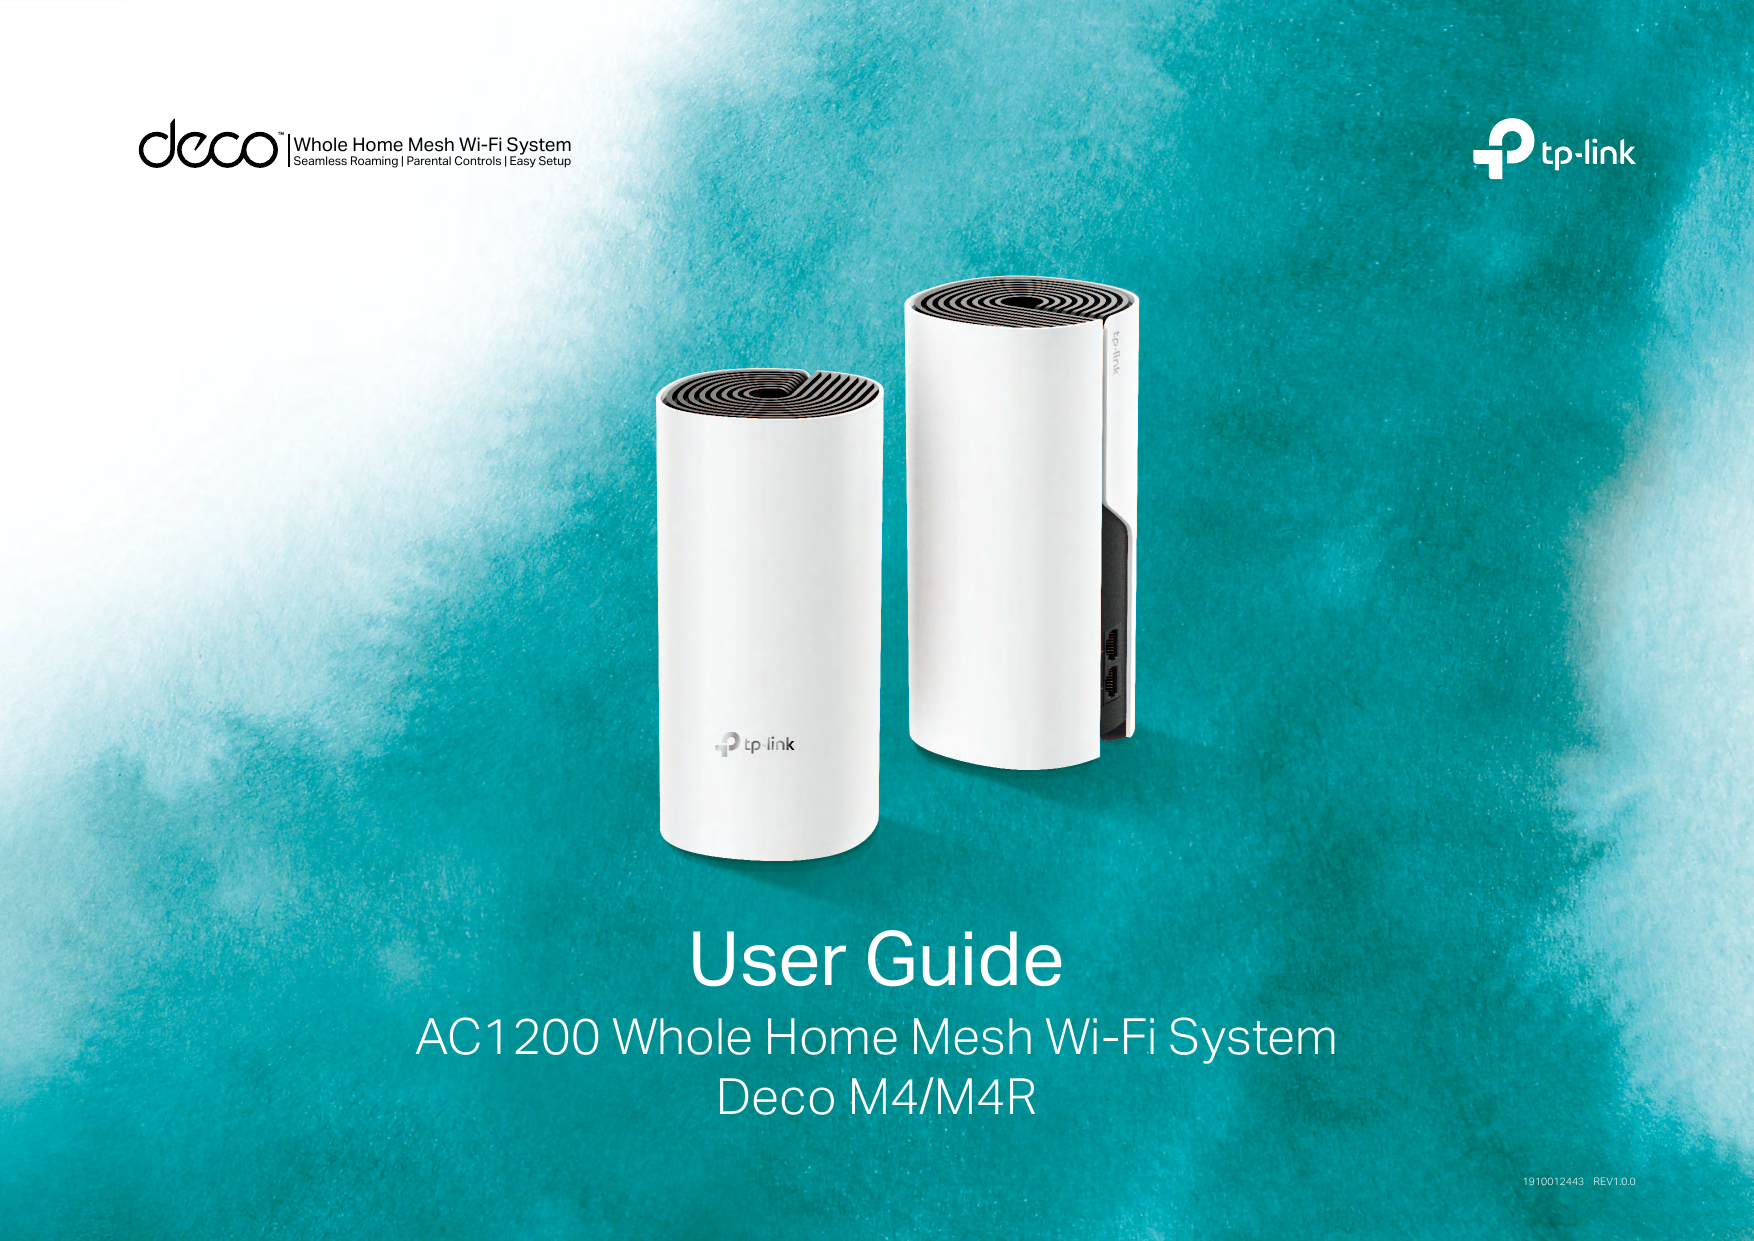 Whole Home Mesh Wi-Fi SystemSeamless Roaming | Parental Controls | Easy SetupUser GuideAC1200 Whole Home Mesh Wi-Fi SystemDeco M4/M4R               1910012443    REV1.0.0